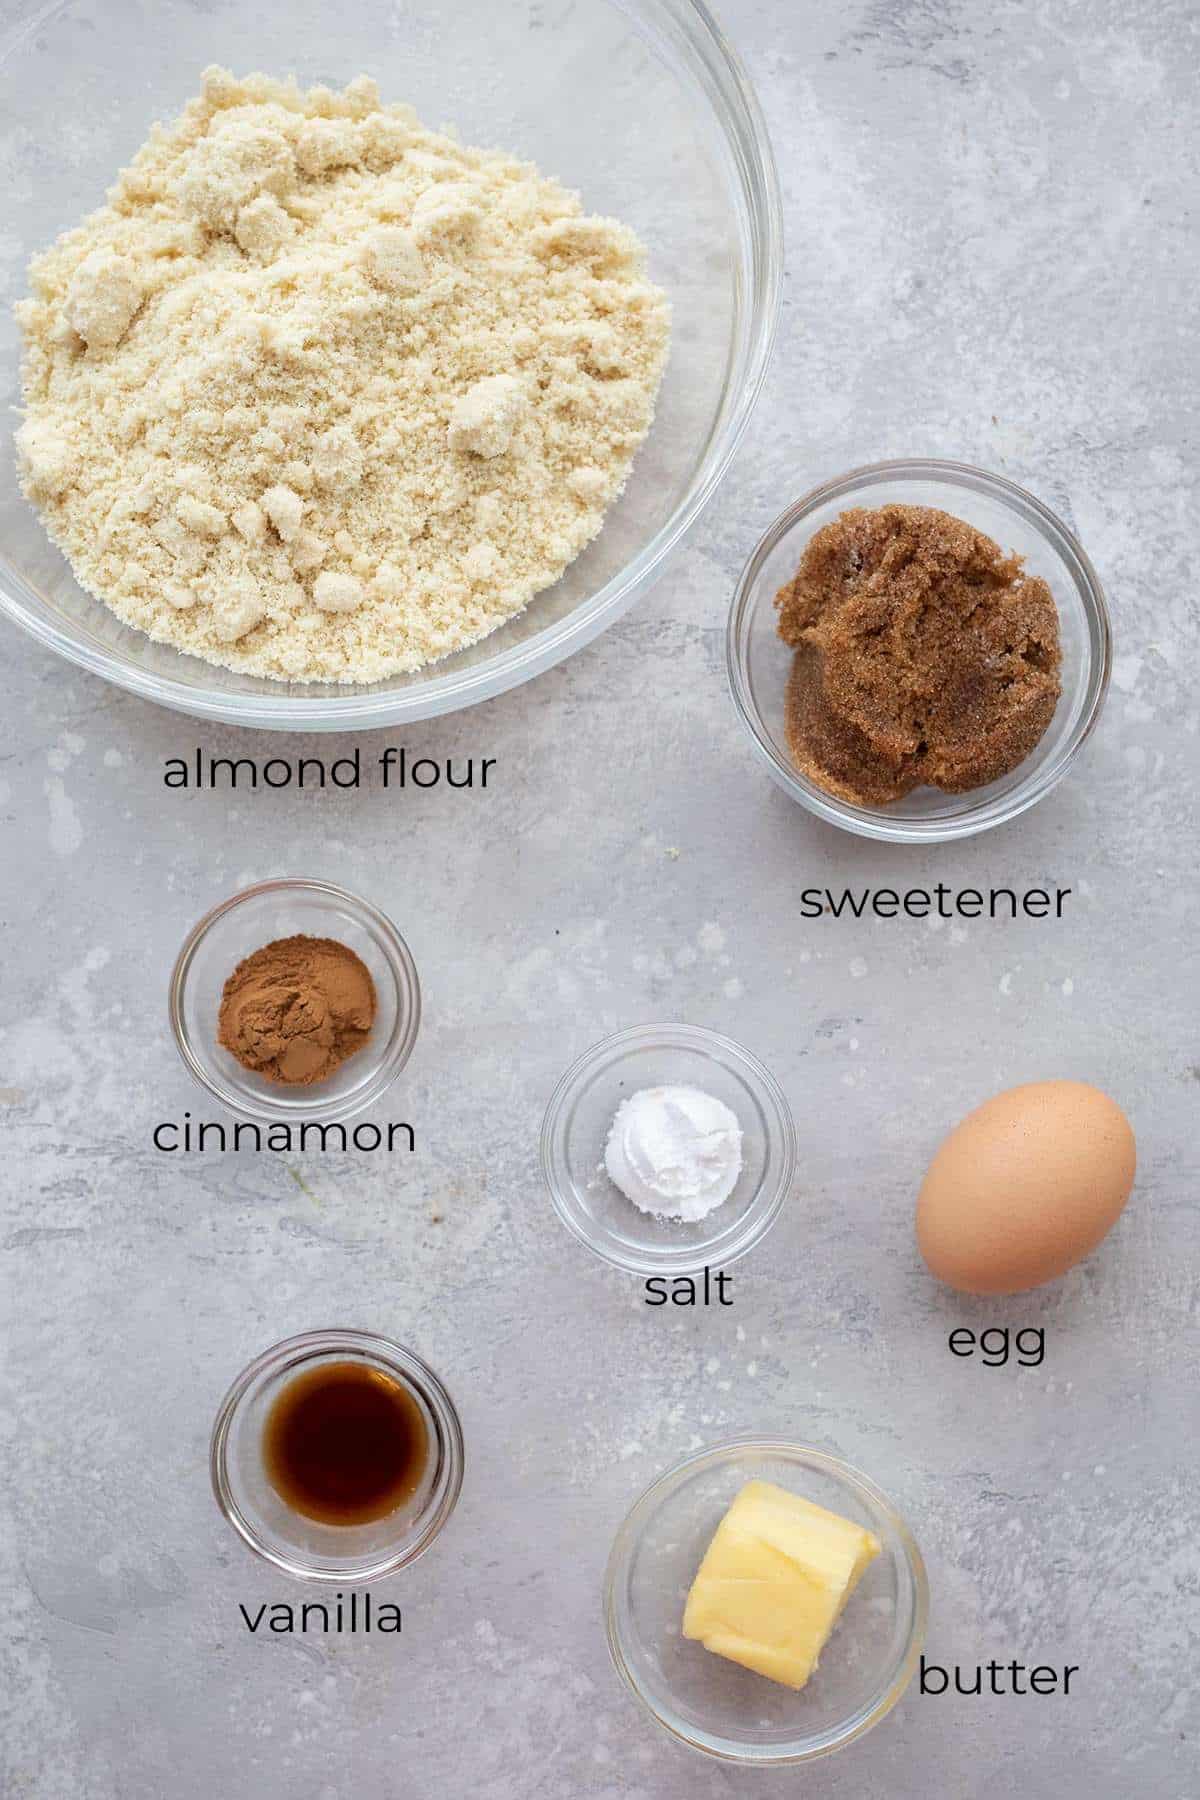 Top down image of ingredients needed for keto graham crackers.